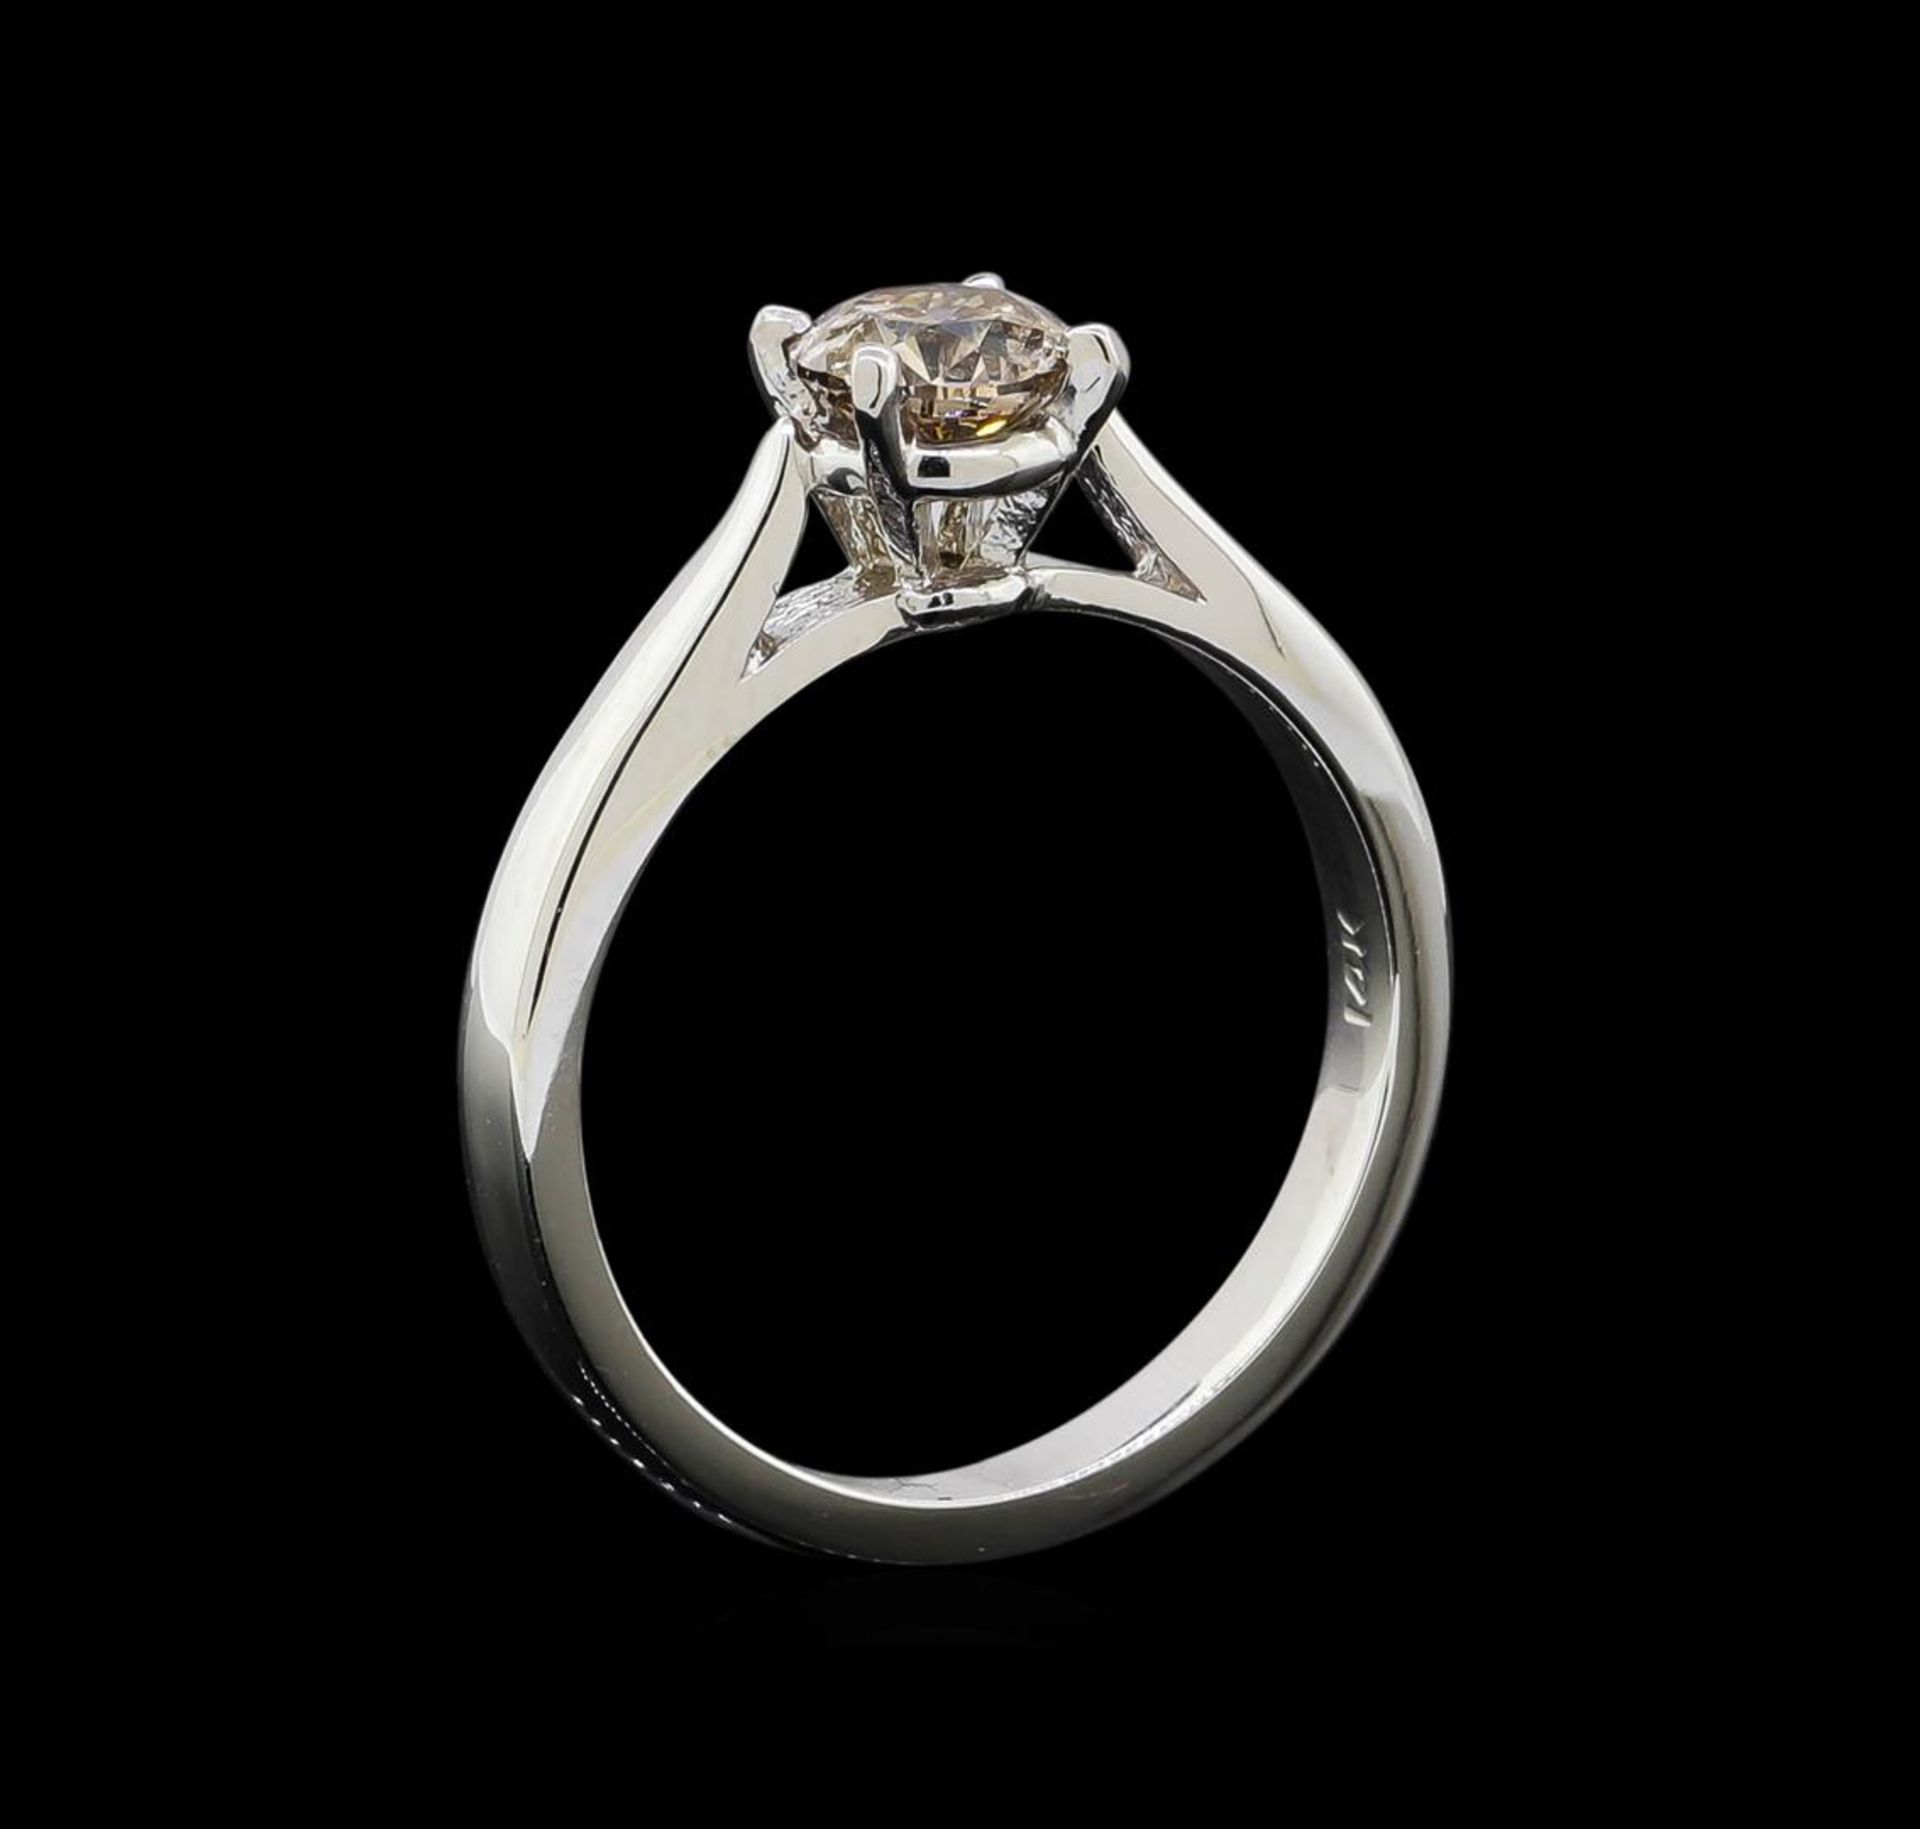 14KT White Gold 0.70 ctw Round Cut Fancy Brown Diamond Solitaire Ring - Image 4 of 5